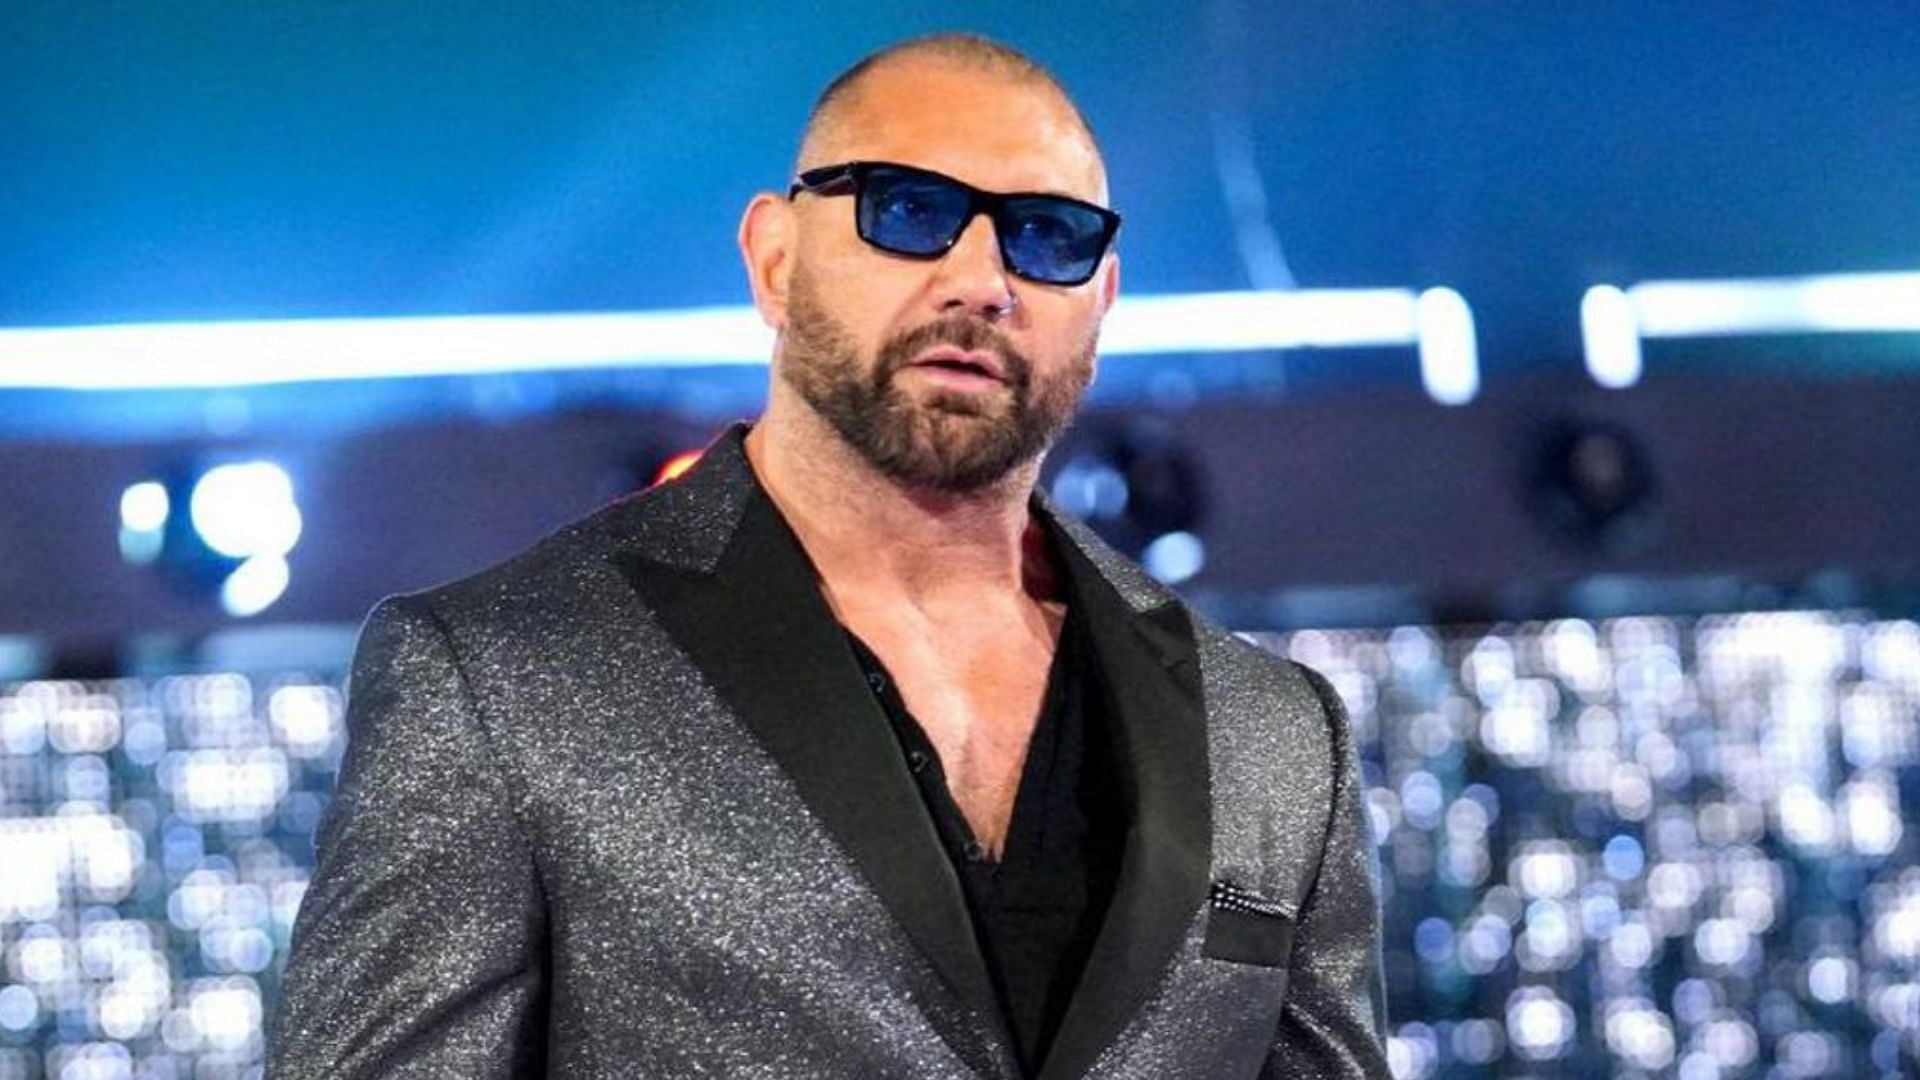 Dave Bautista (Batista) is now a Hollywood movie star